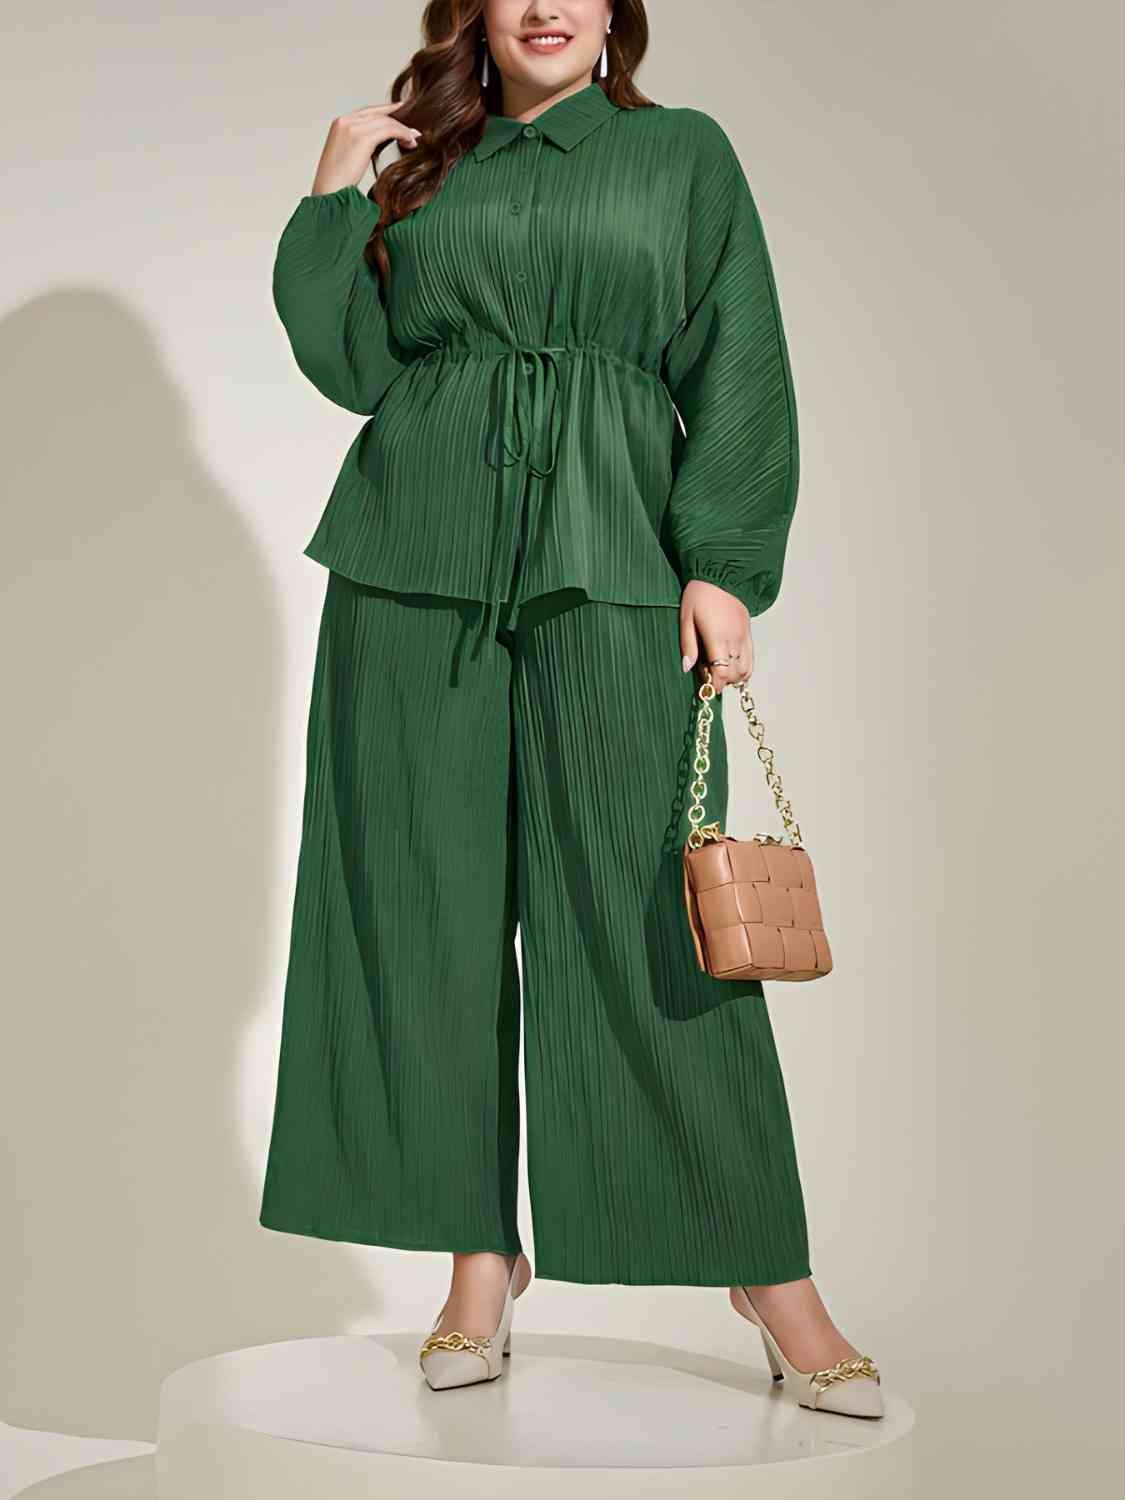 a woman in a green jumpsuit holding a purse